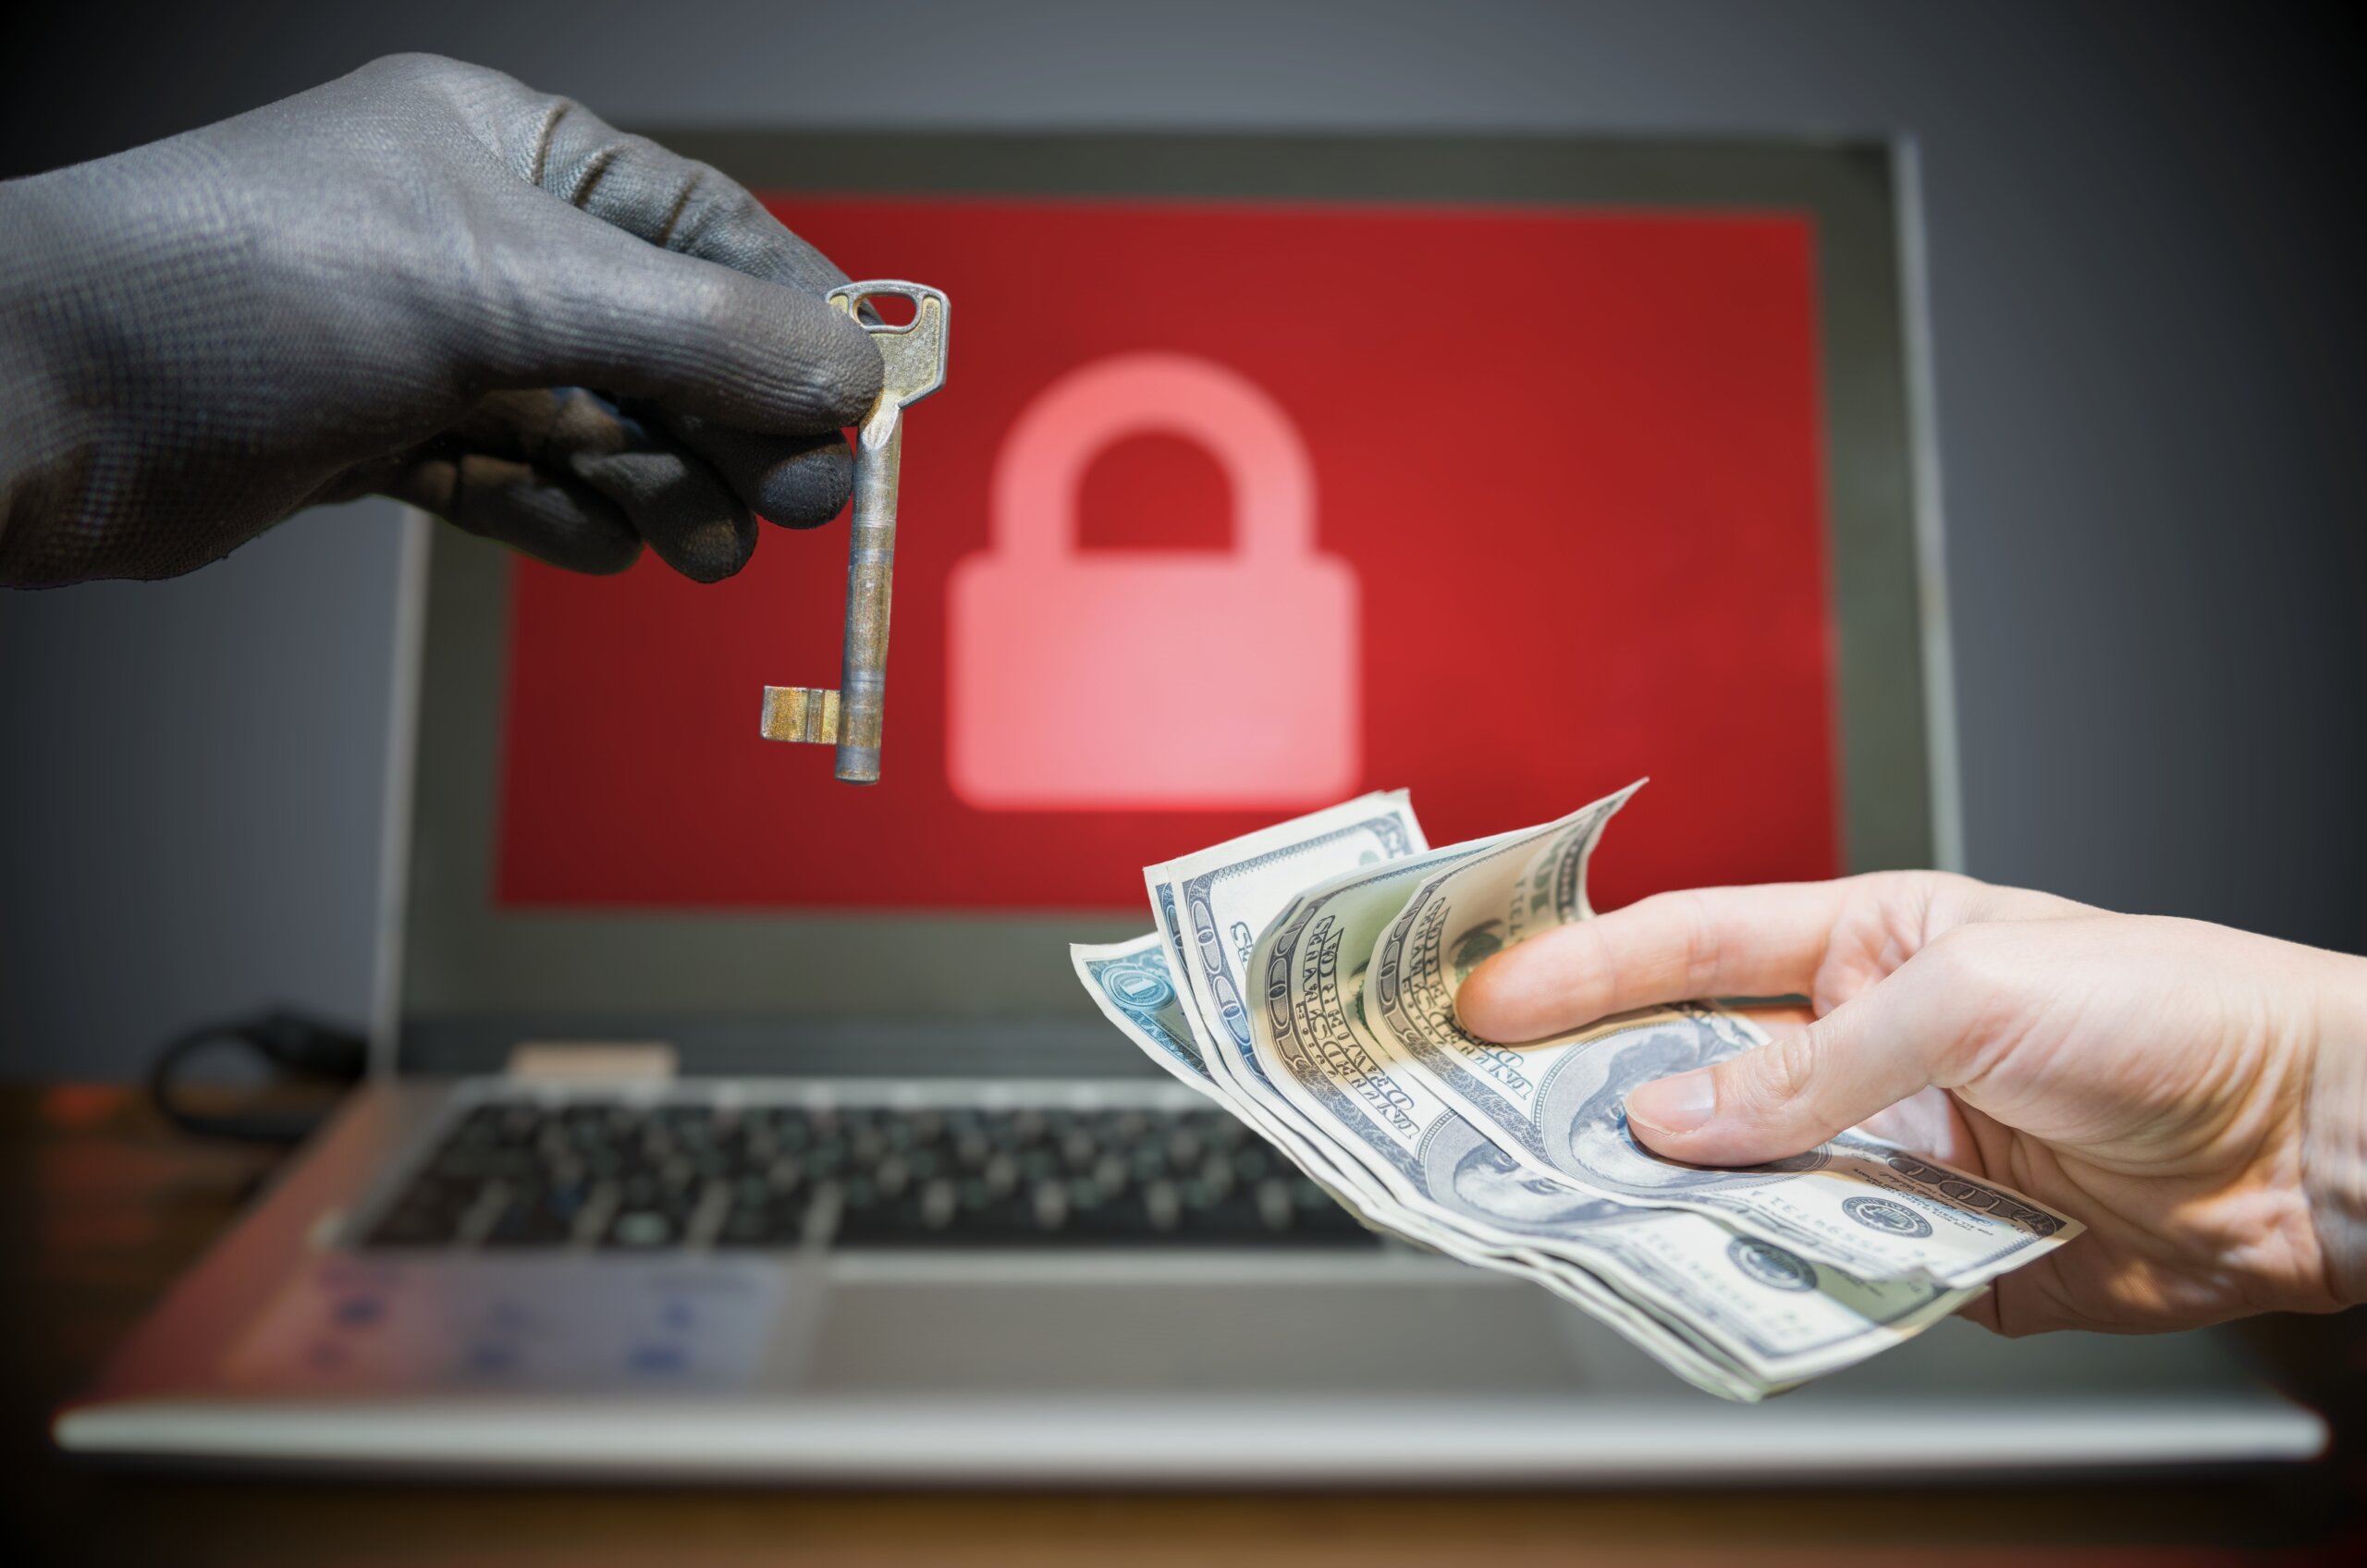 Cybersecurity ransomware incidents are on the rise leading organizations to pay ransoms.